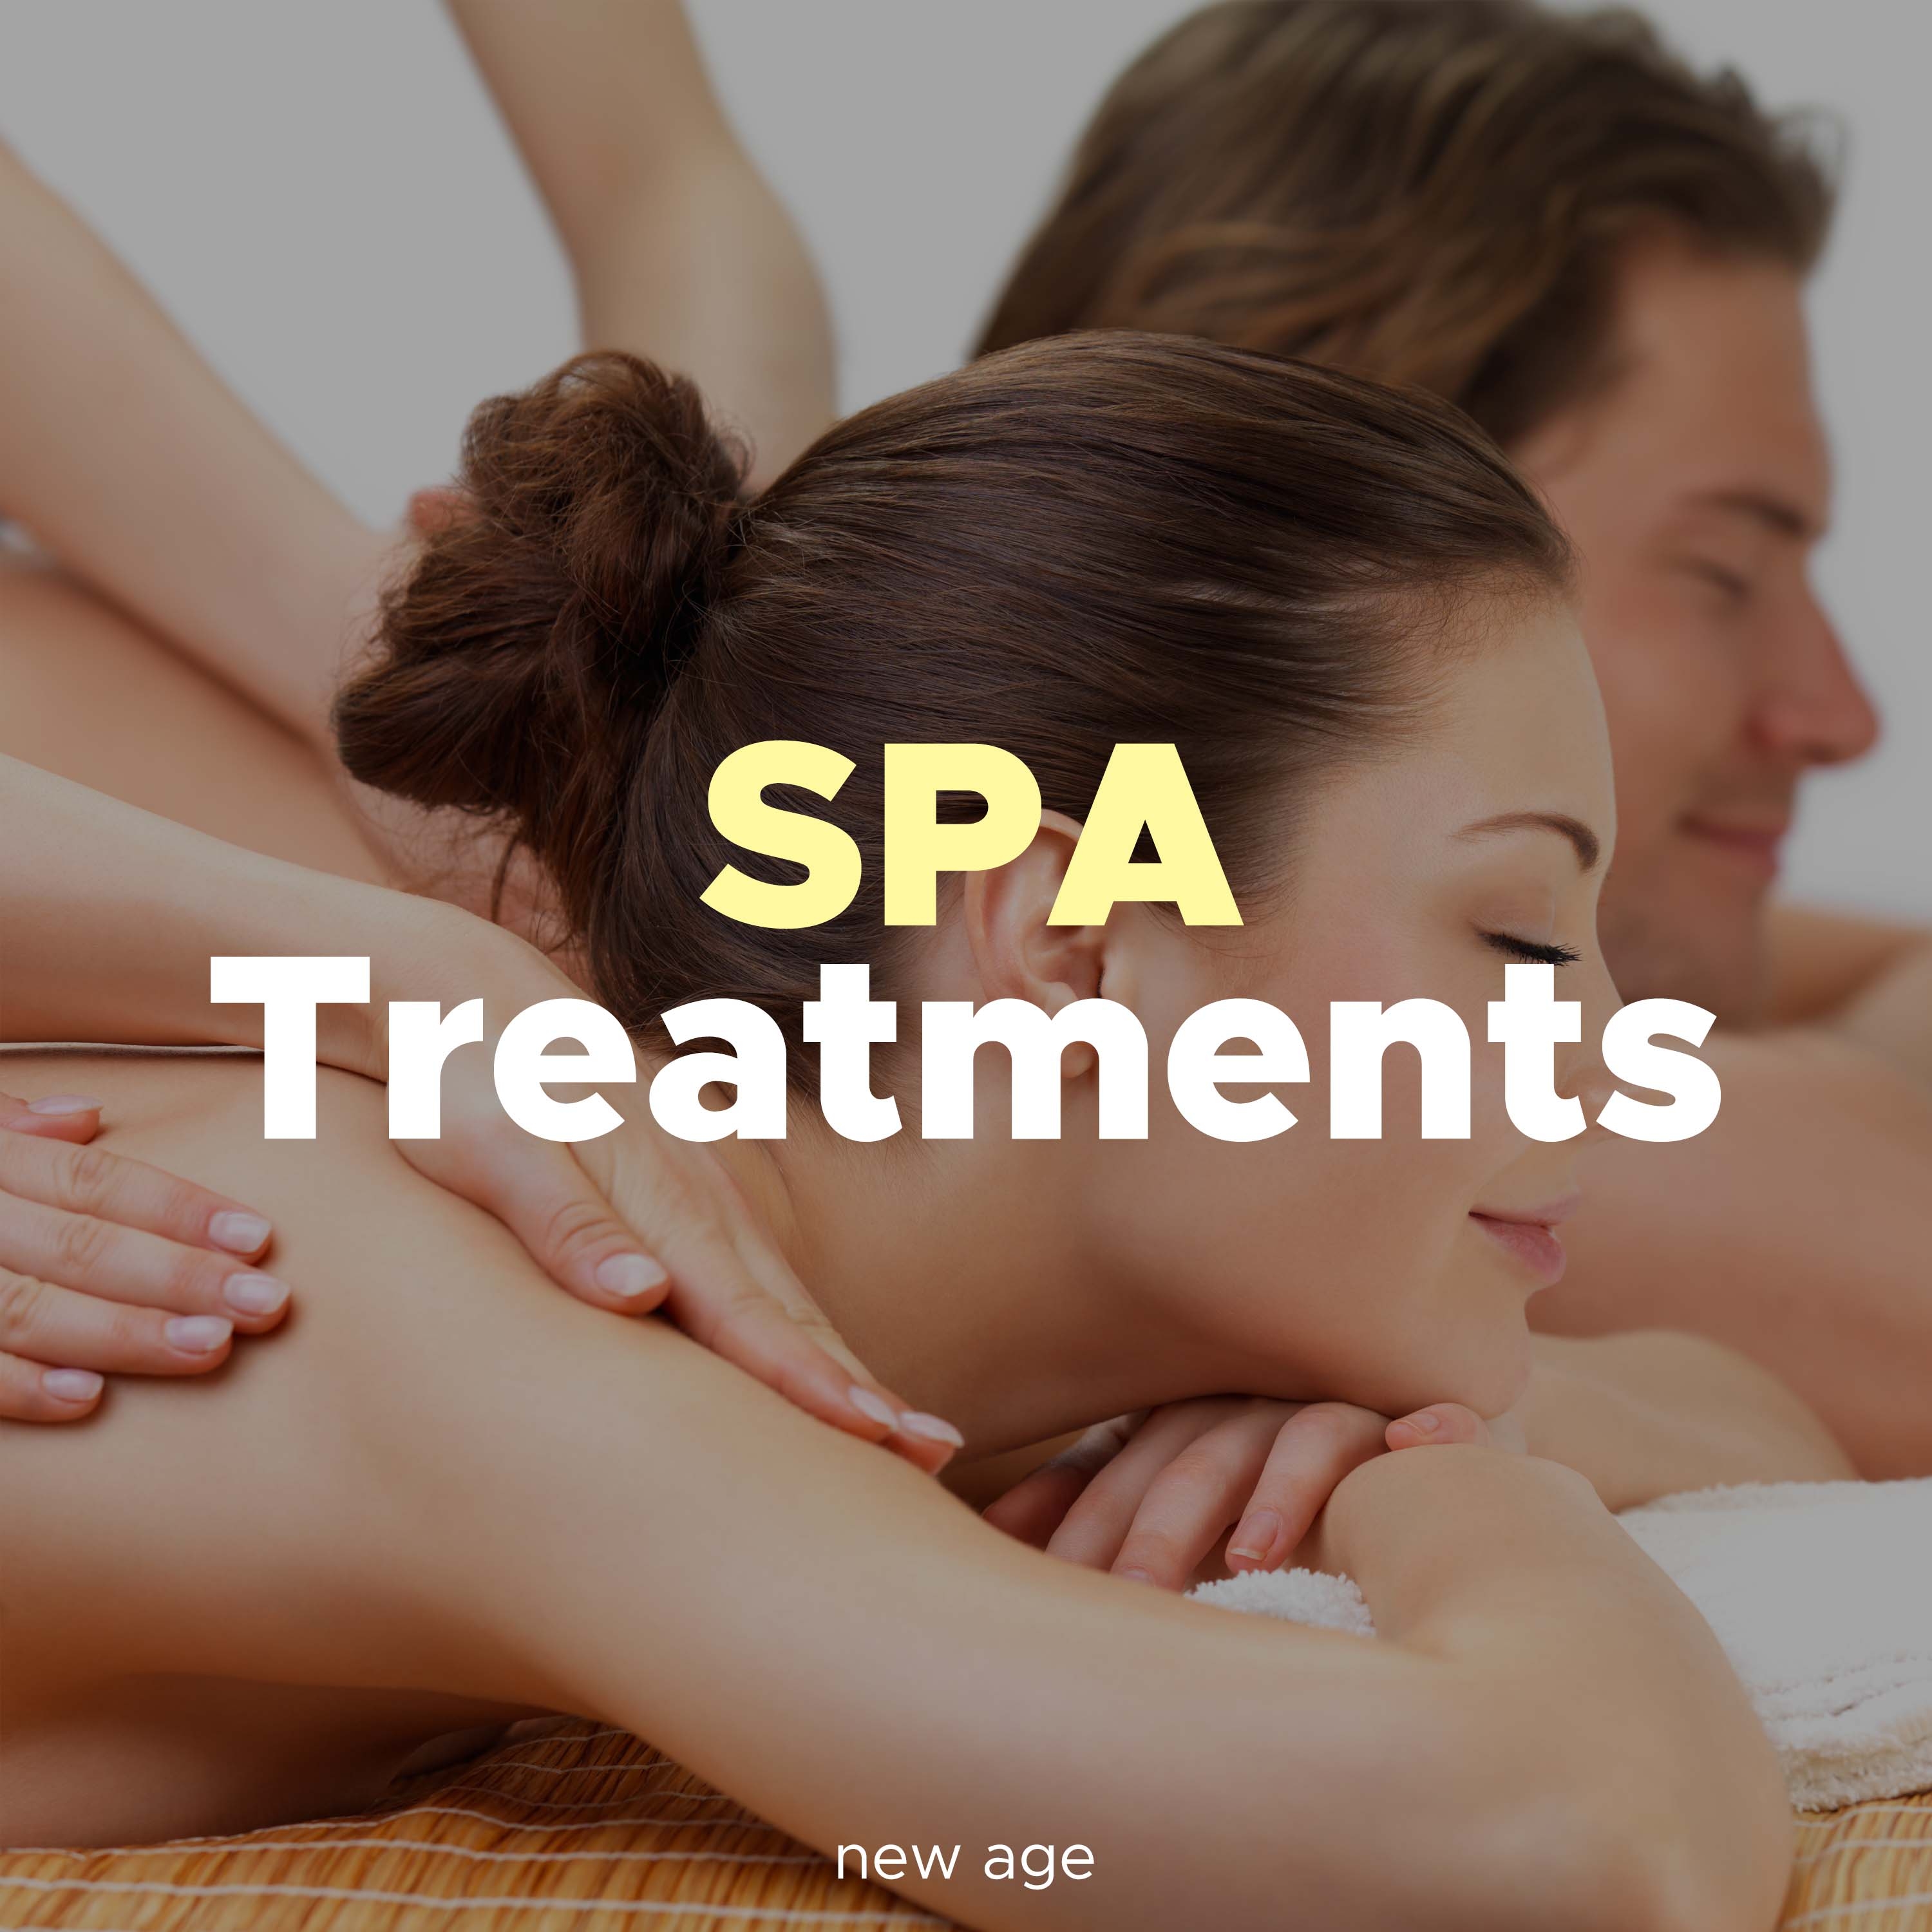 Spa Treatments - Relaxing Background Music Tracks for Wellness Centers, Baths, Swimming Pools, Sauna, Massage